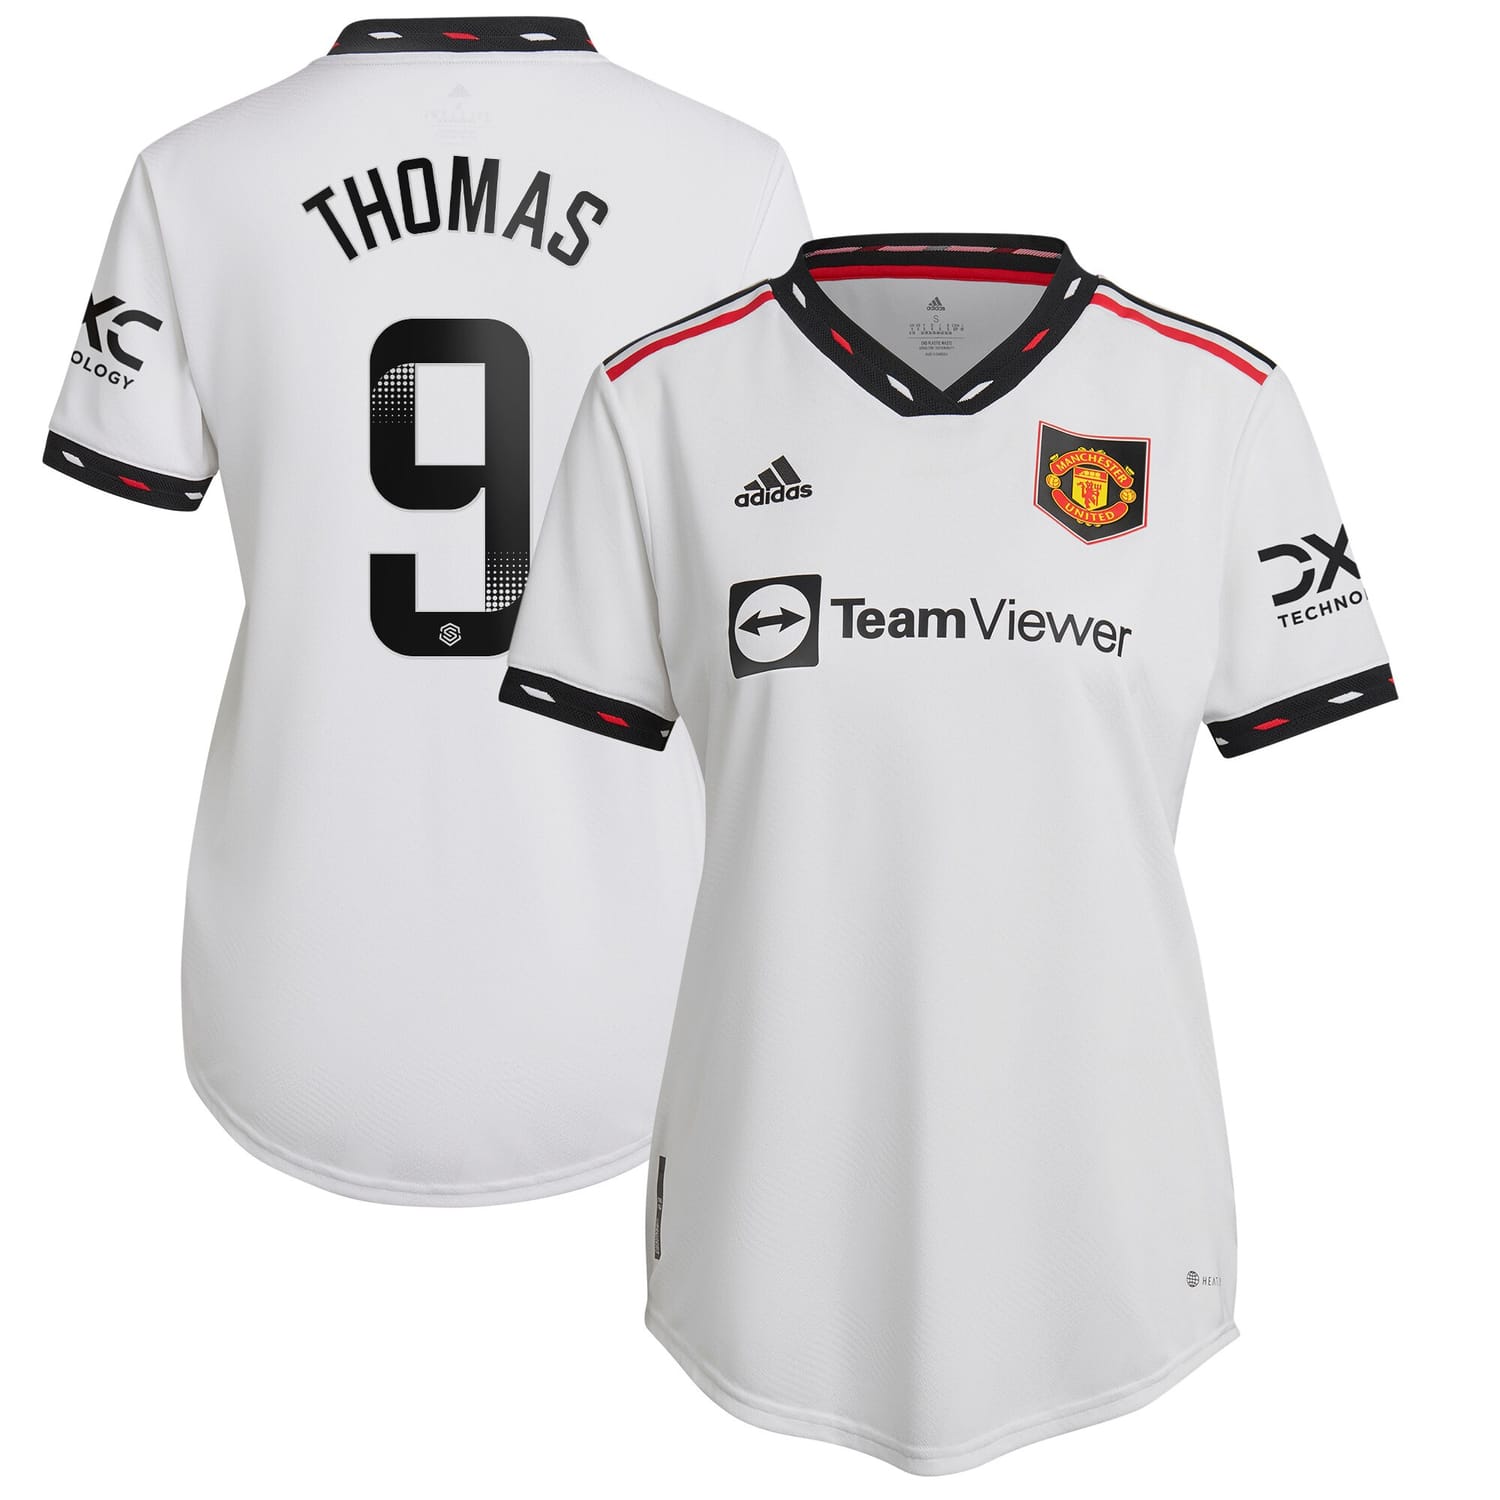 Premier League Manchester United Away WSL Authentic Jersey Shirt 2022-23 player Martha Thomas 9 printing for Women